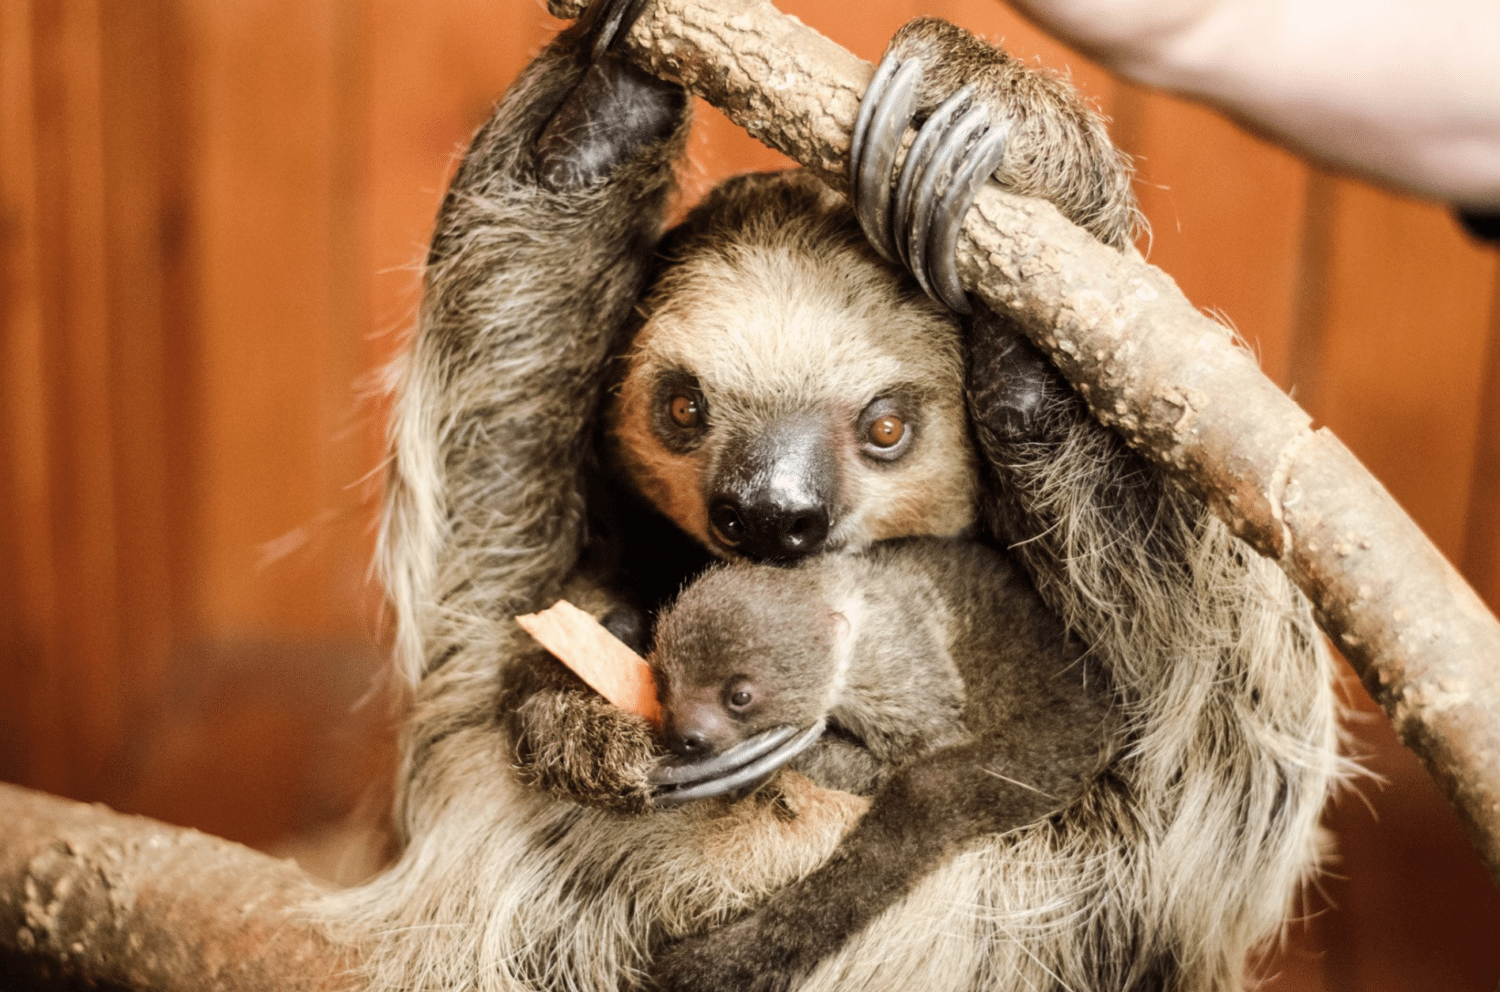 Surprise Baby Sloth Born At Texas Zoo - Simplemost